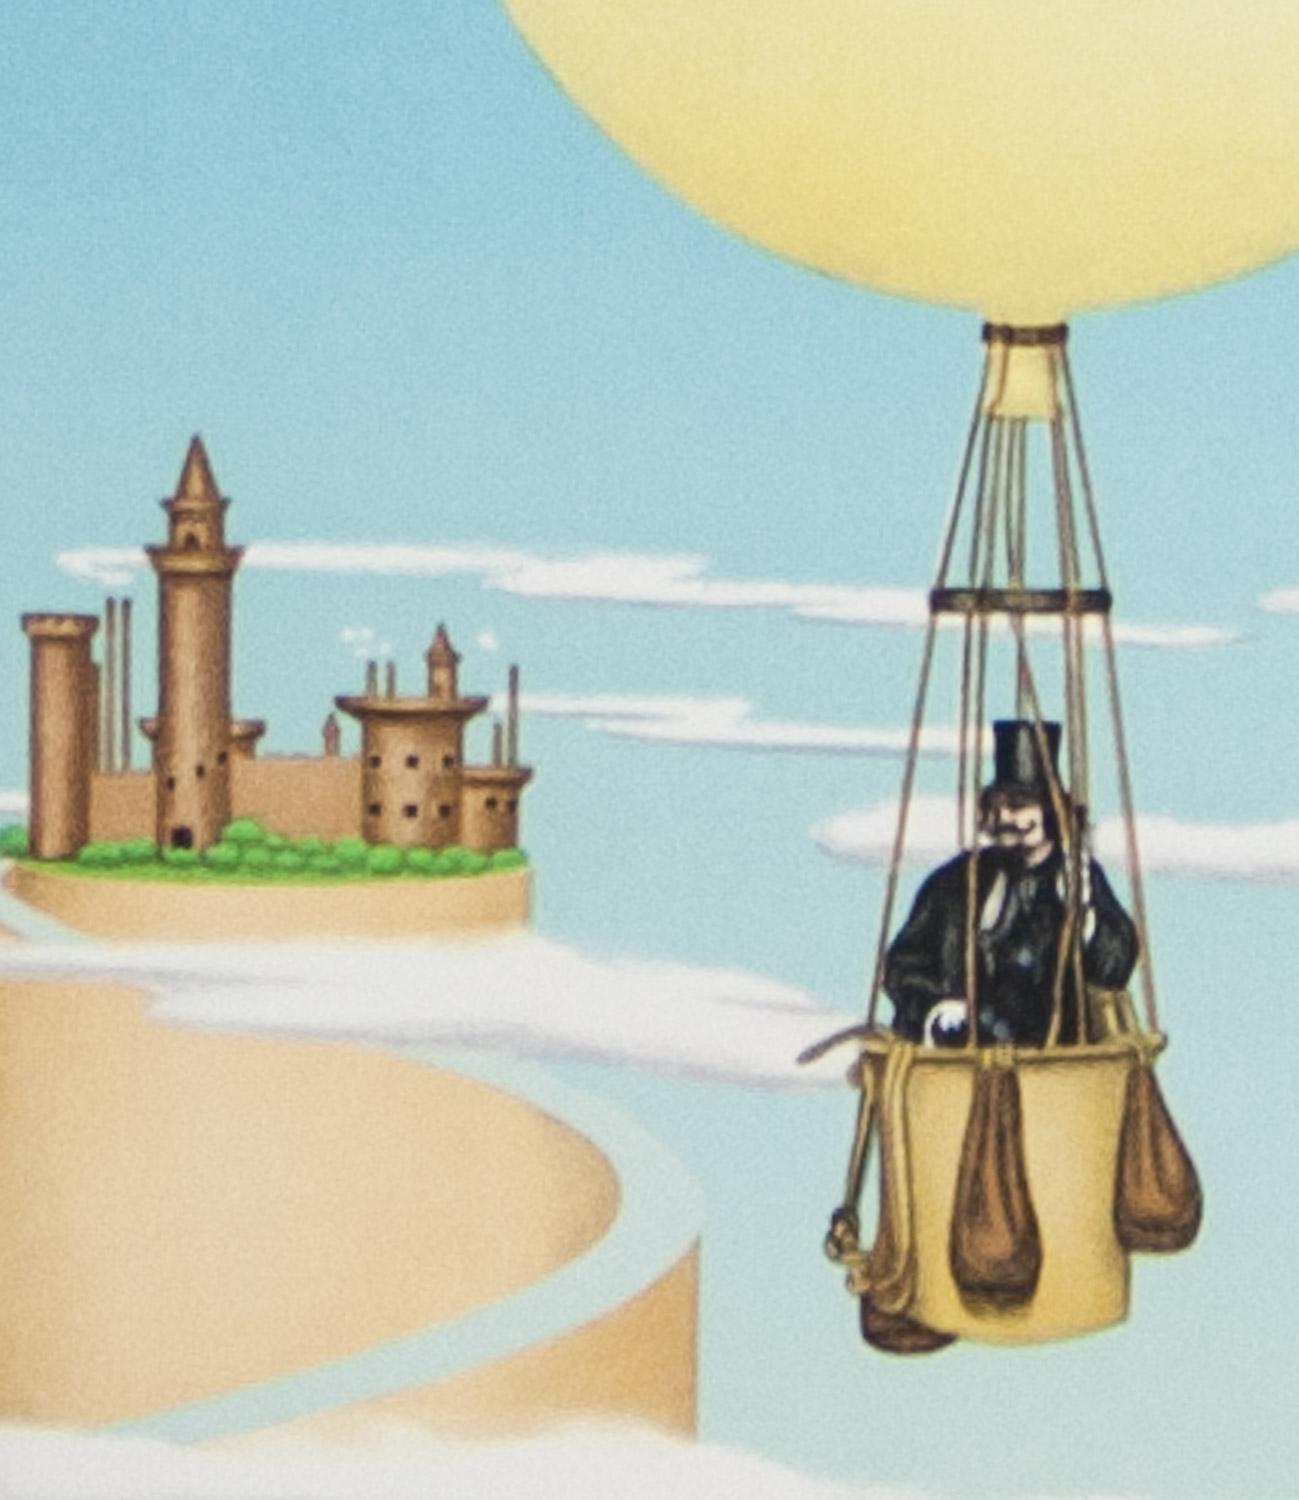 Flights of Fancy is an original signed limited edition (060/250 )  lithograph by Michel Pellus showing  a man in a top hat floating in the sky in a hot air balloon, another top hatted man in the sky on a carousel horse and holding an umbrella  and